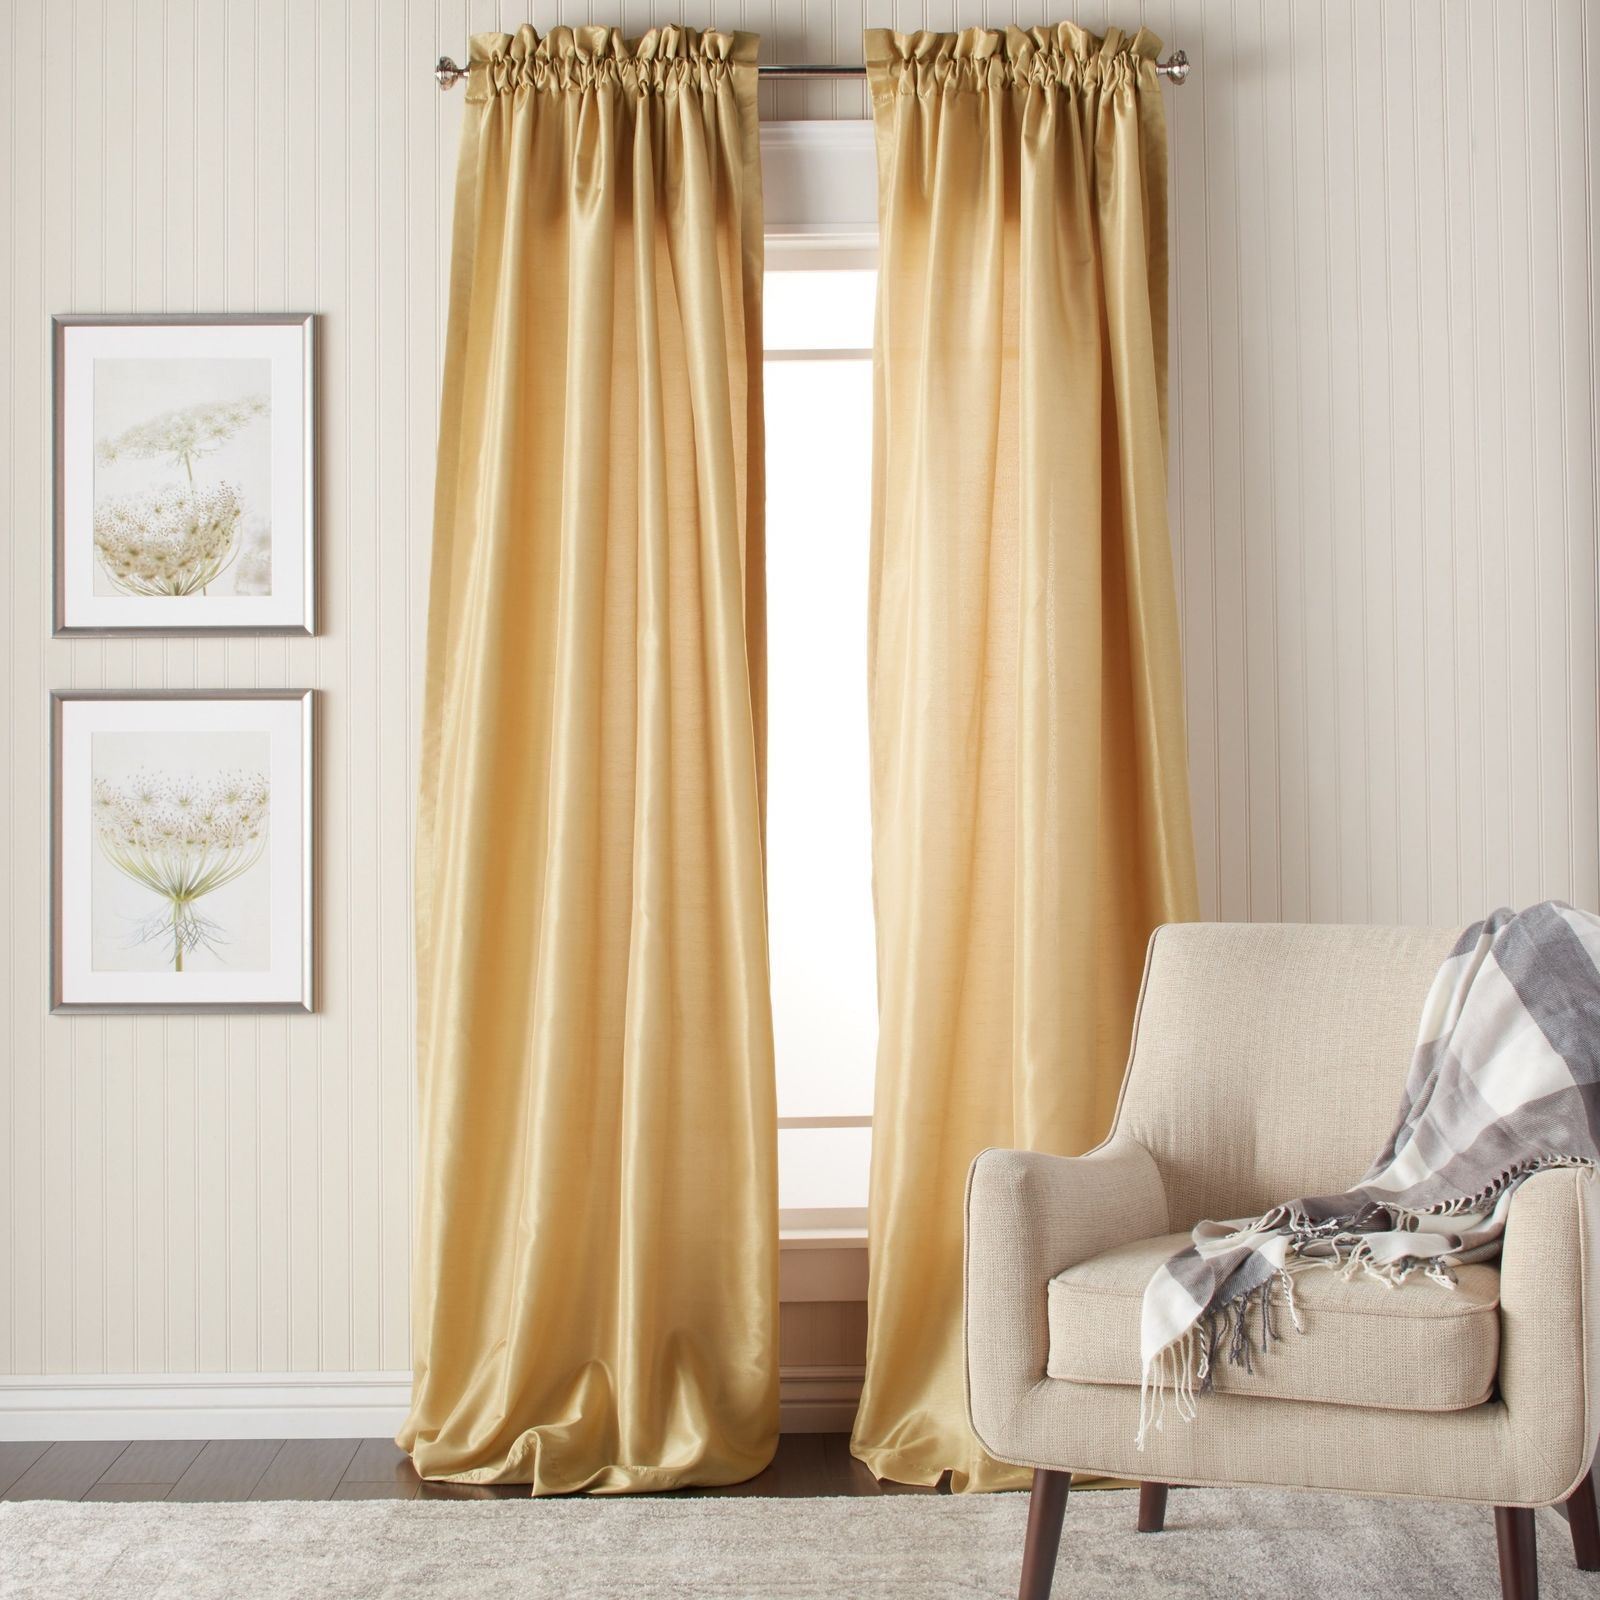 From Drapes To Panels: Demystifying Curtain Types And Styles